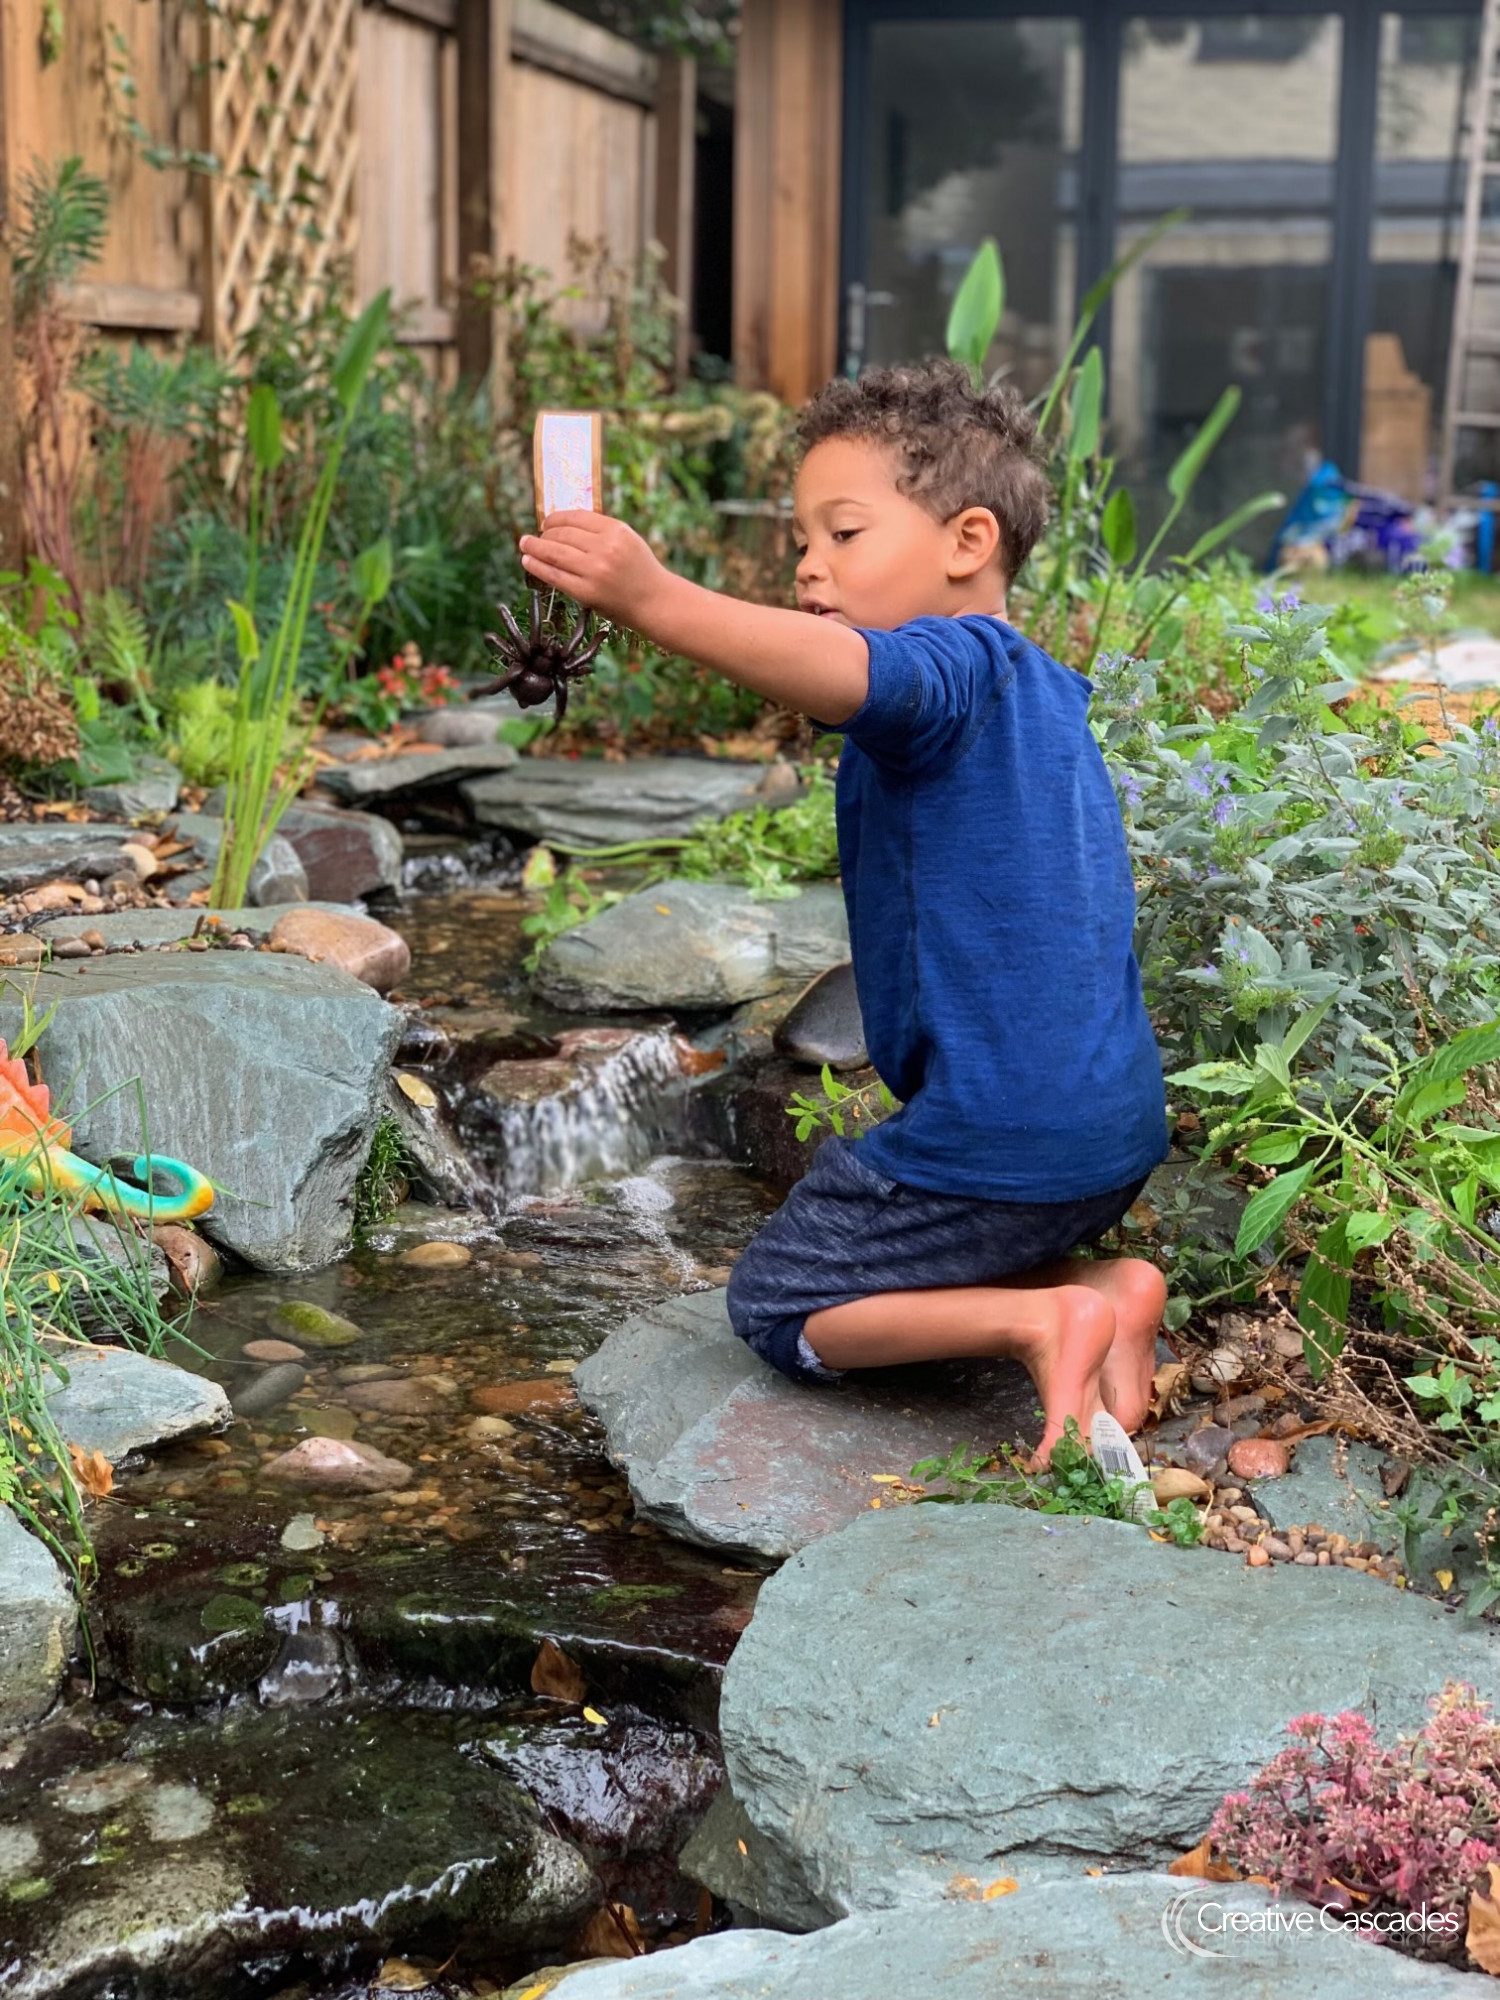 Our Client's Grandson is obsessed with their new feature!  - Landscaping and Water Features -  Creative Cascades